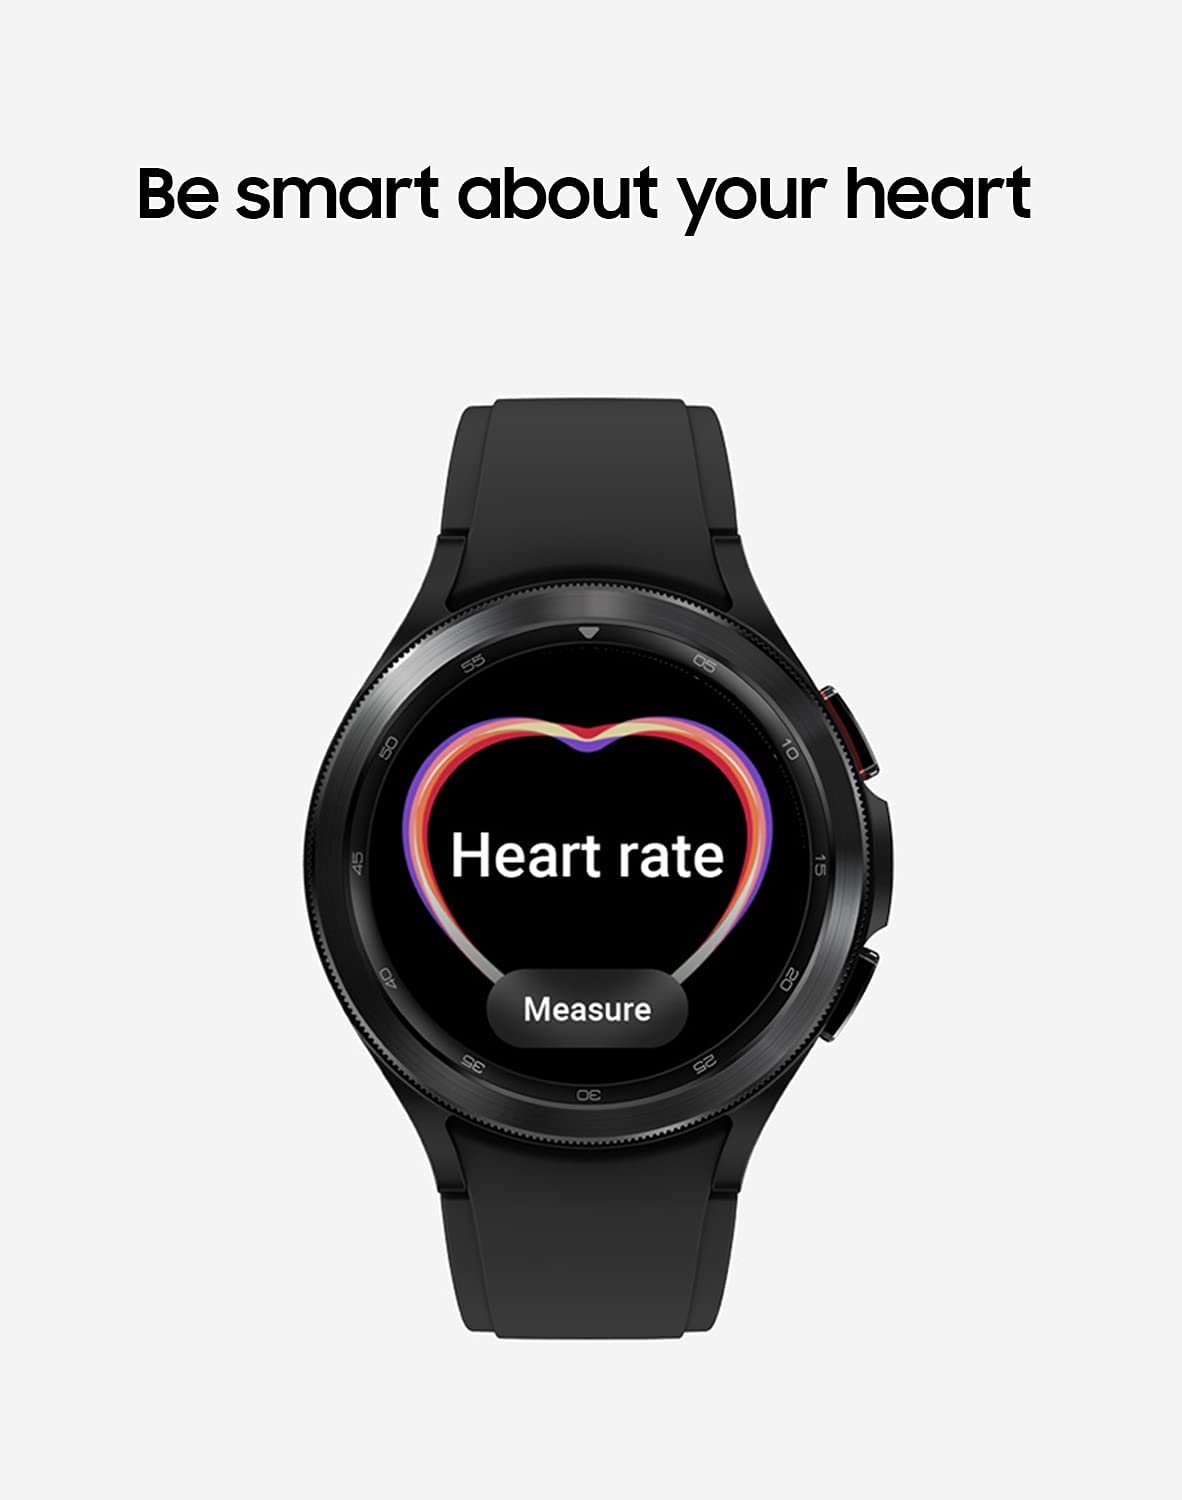 SAMSUNG Galaxy Watch 4 LTE 46mm Smartwatch with ECG Monitor Tracker for Health, Fitness, Running, Sleep Cycles, GPS Fall Detection, LTE, US Version, Black